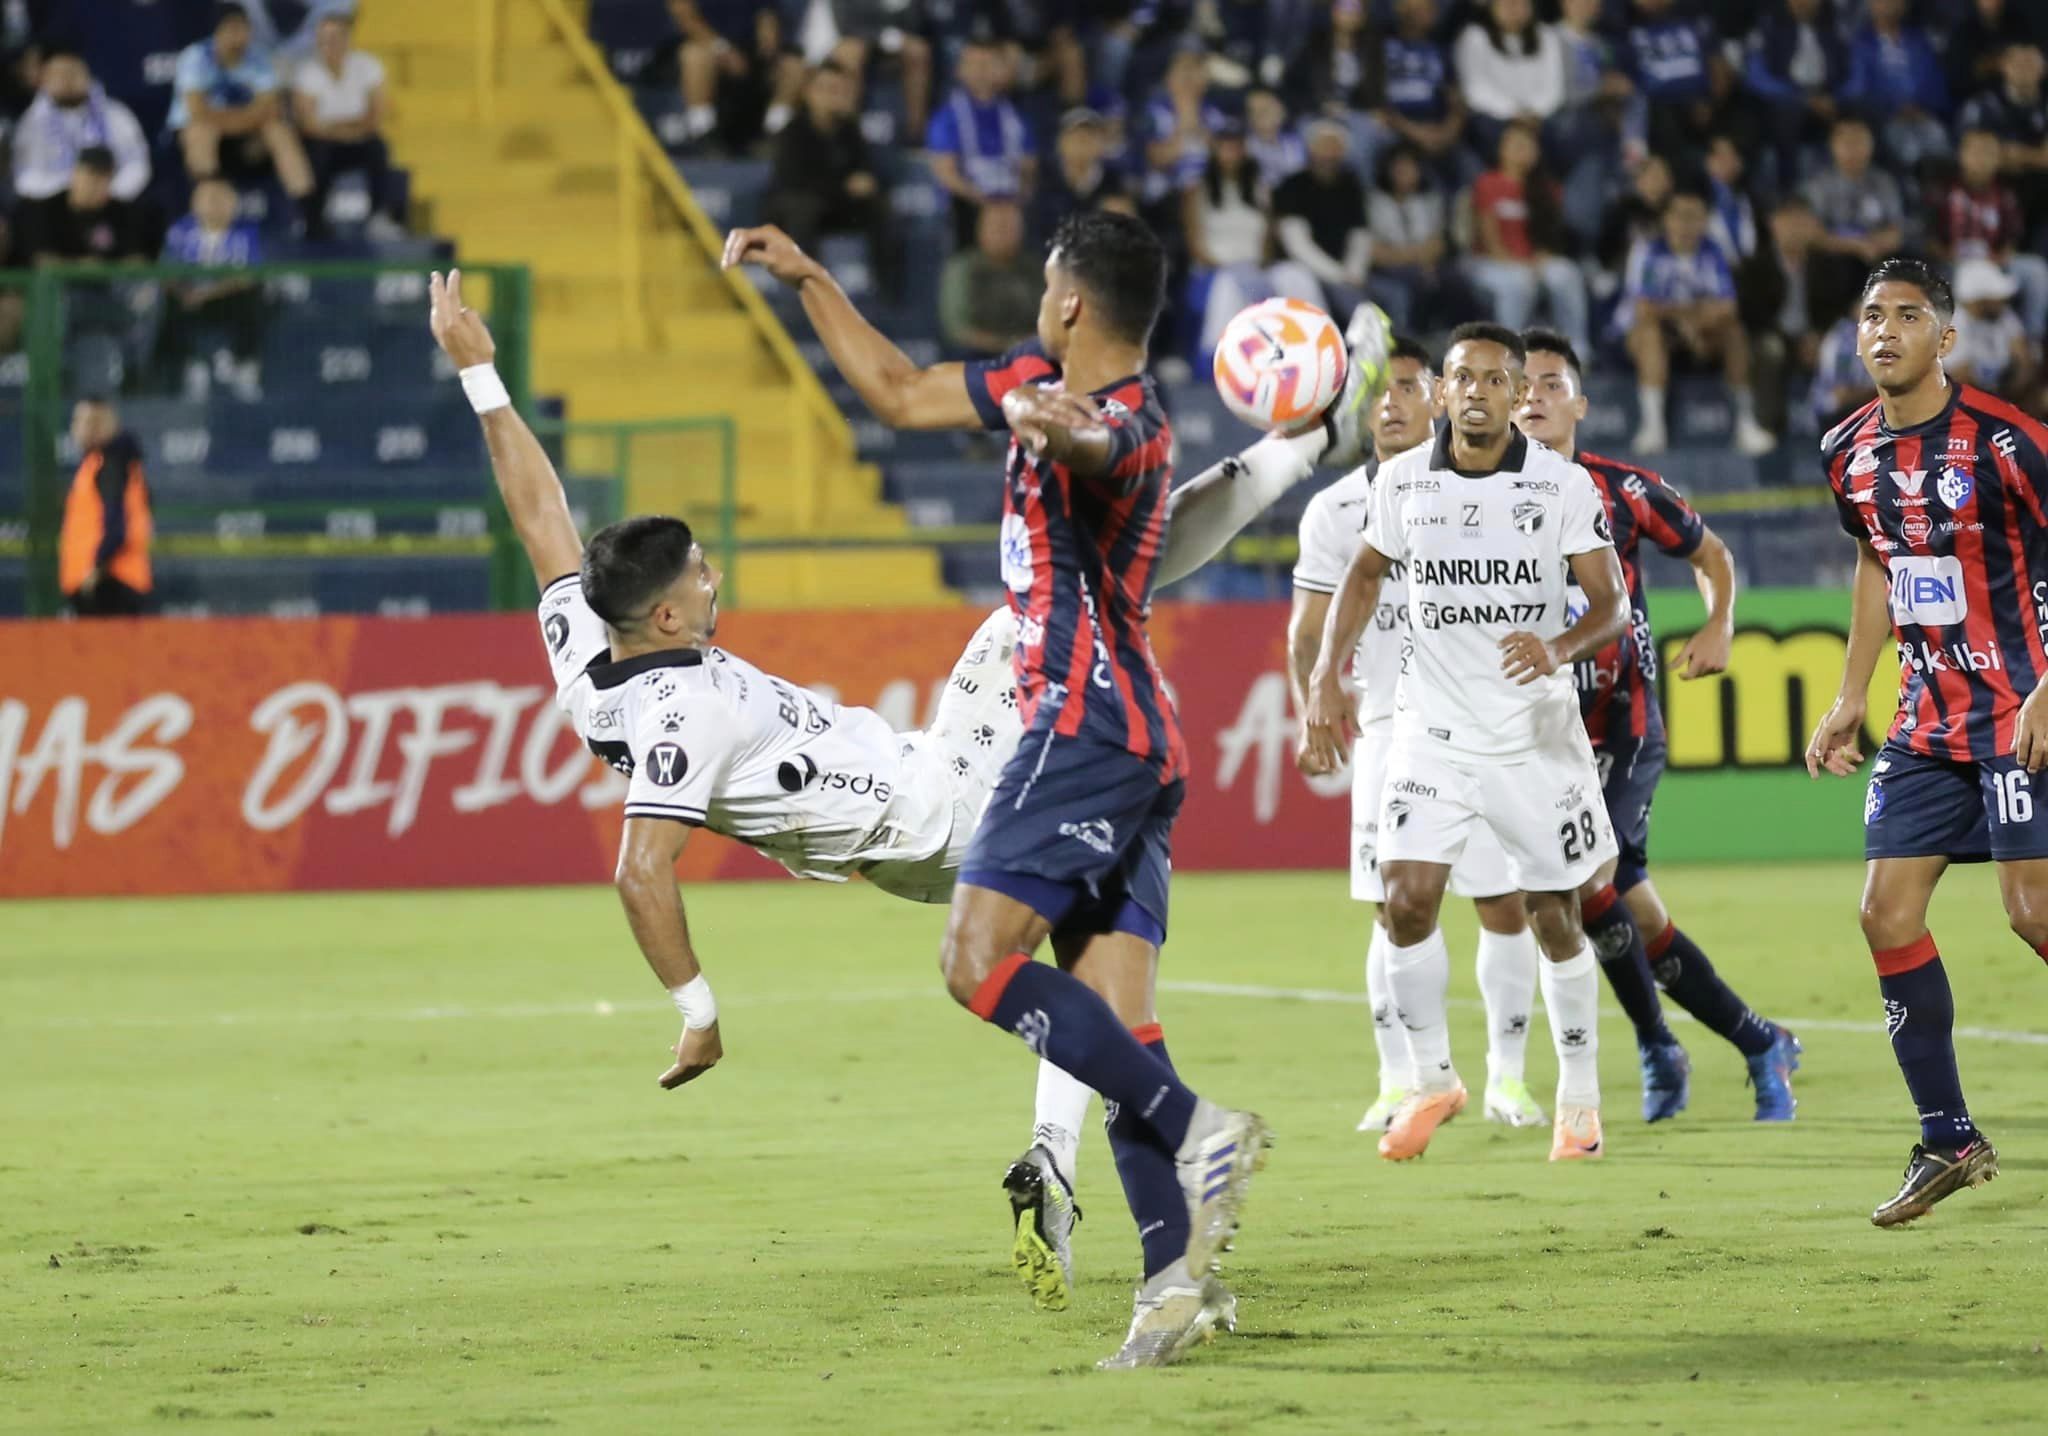 This was the goal of Chile’s Gerardo Gordillo in the communications match against Cartagena